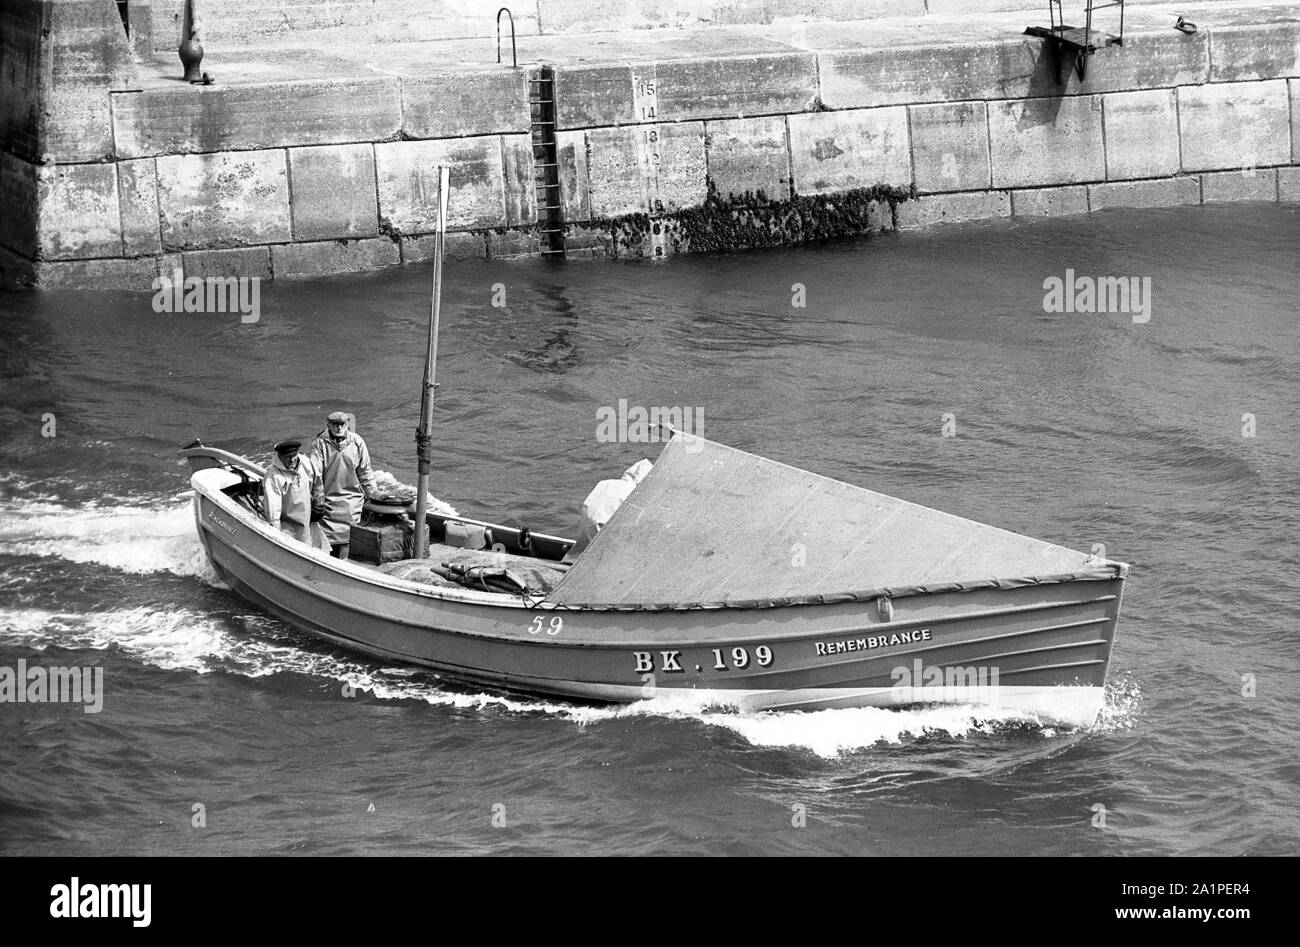 Fishing Coble Remembrance, BK 199, arriving at Seahouses, Northumberland, c.1972 Stock Photo